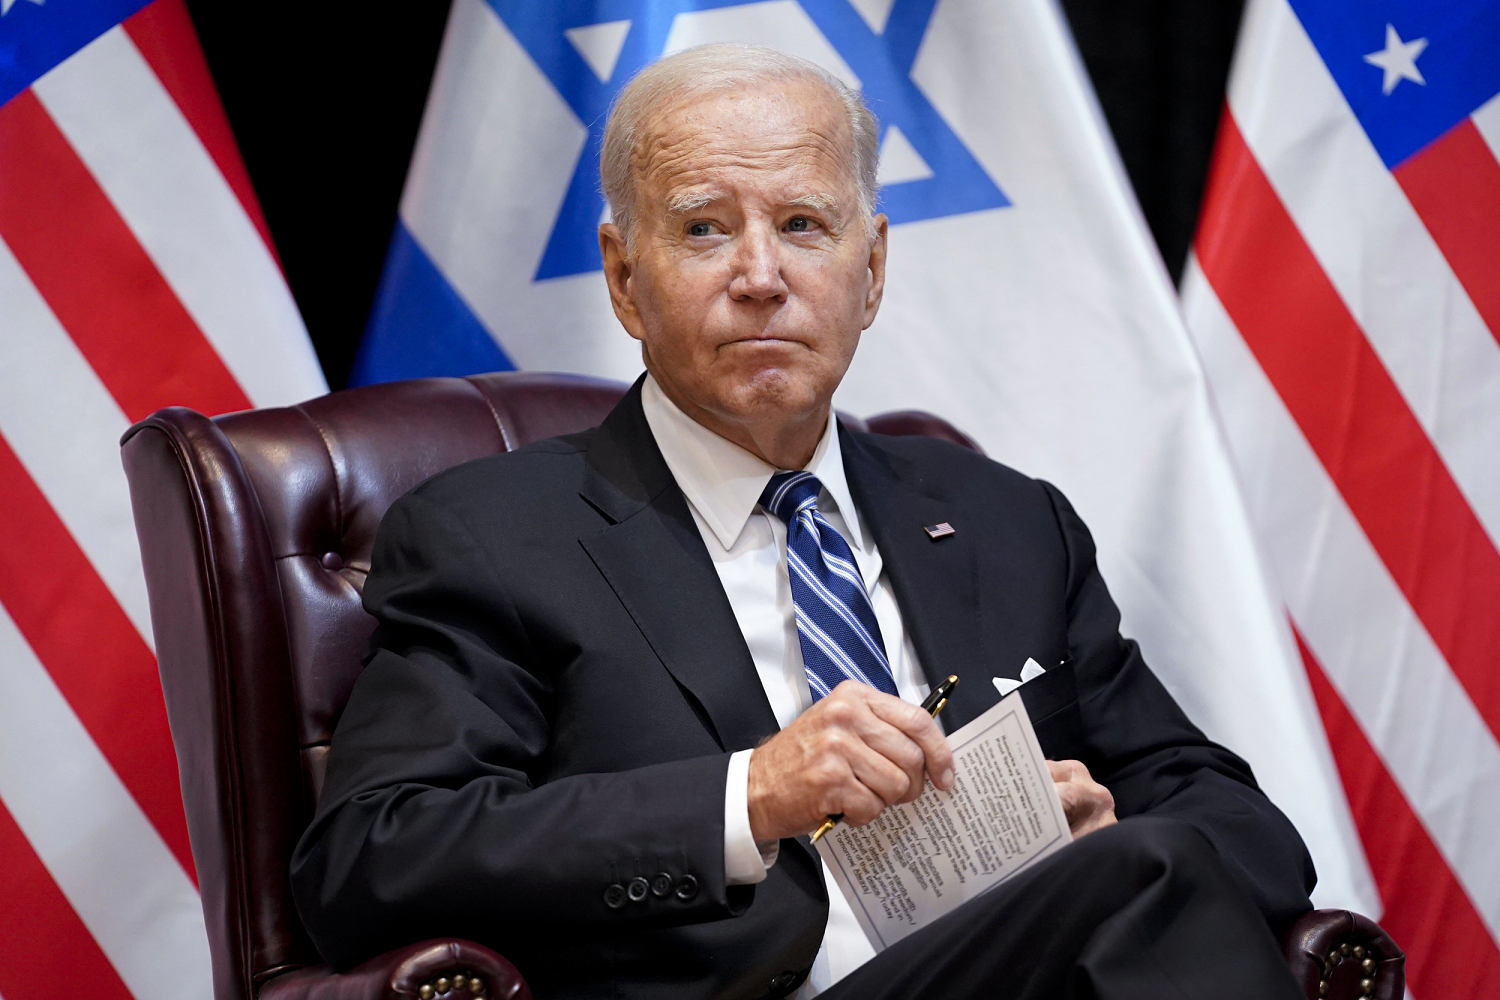 Israel to open more aid routes to Gaza and increase deliveries after pressure from Biden